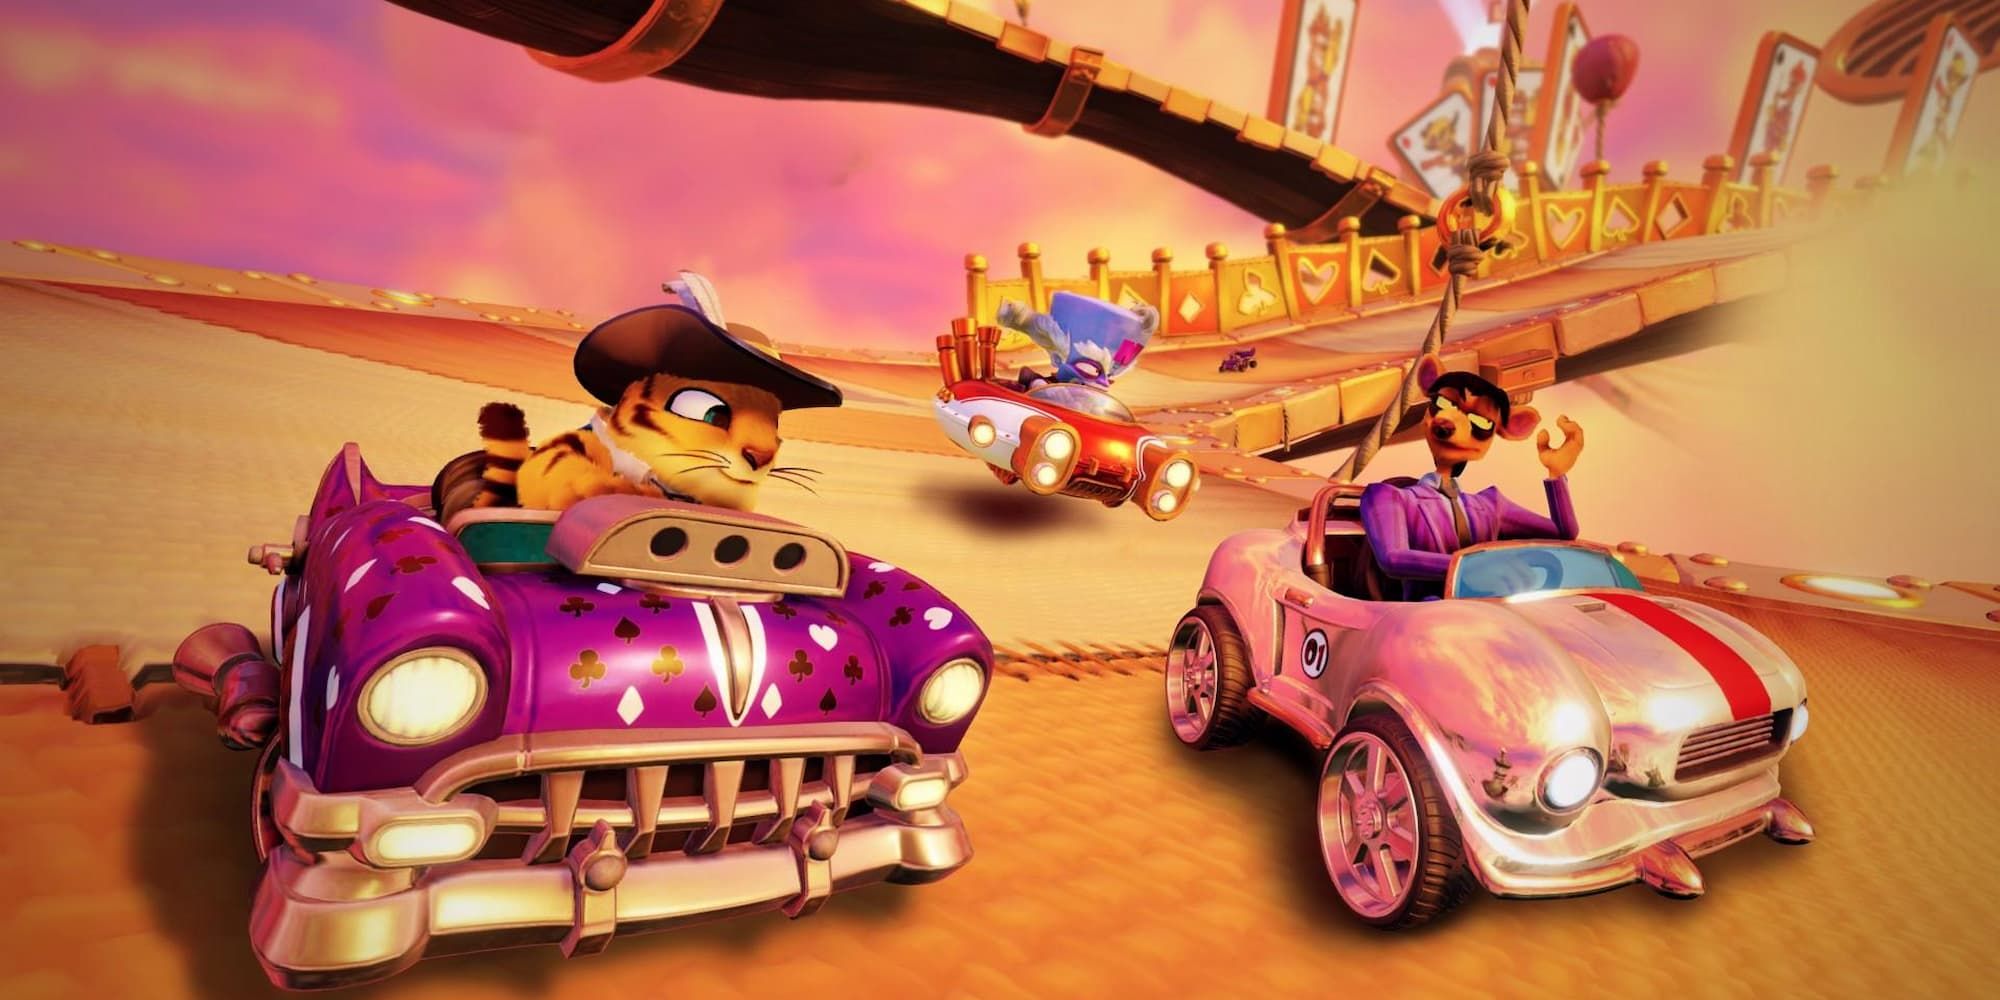 Three racers try and take the lead on Hot Air Skyway in Crash Team Racing - Nitro Fueled.